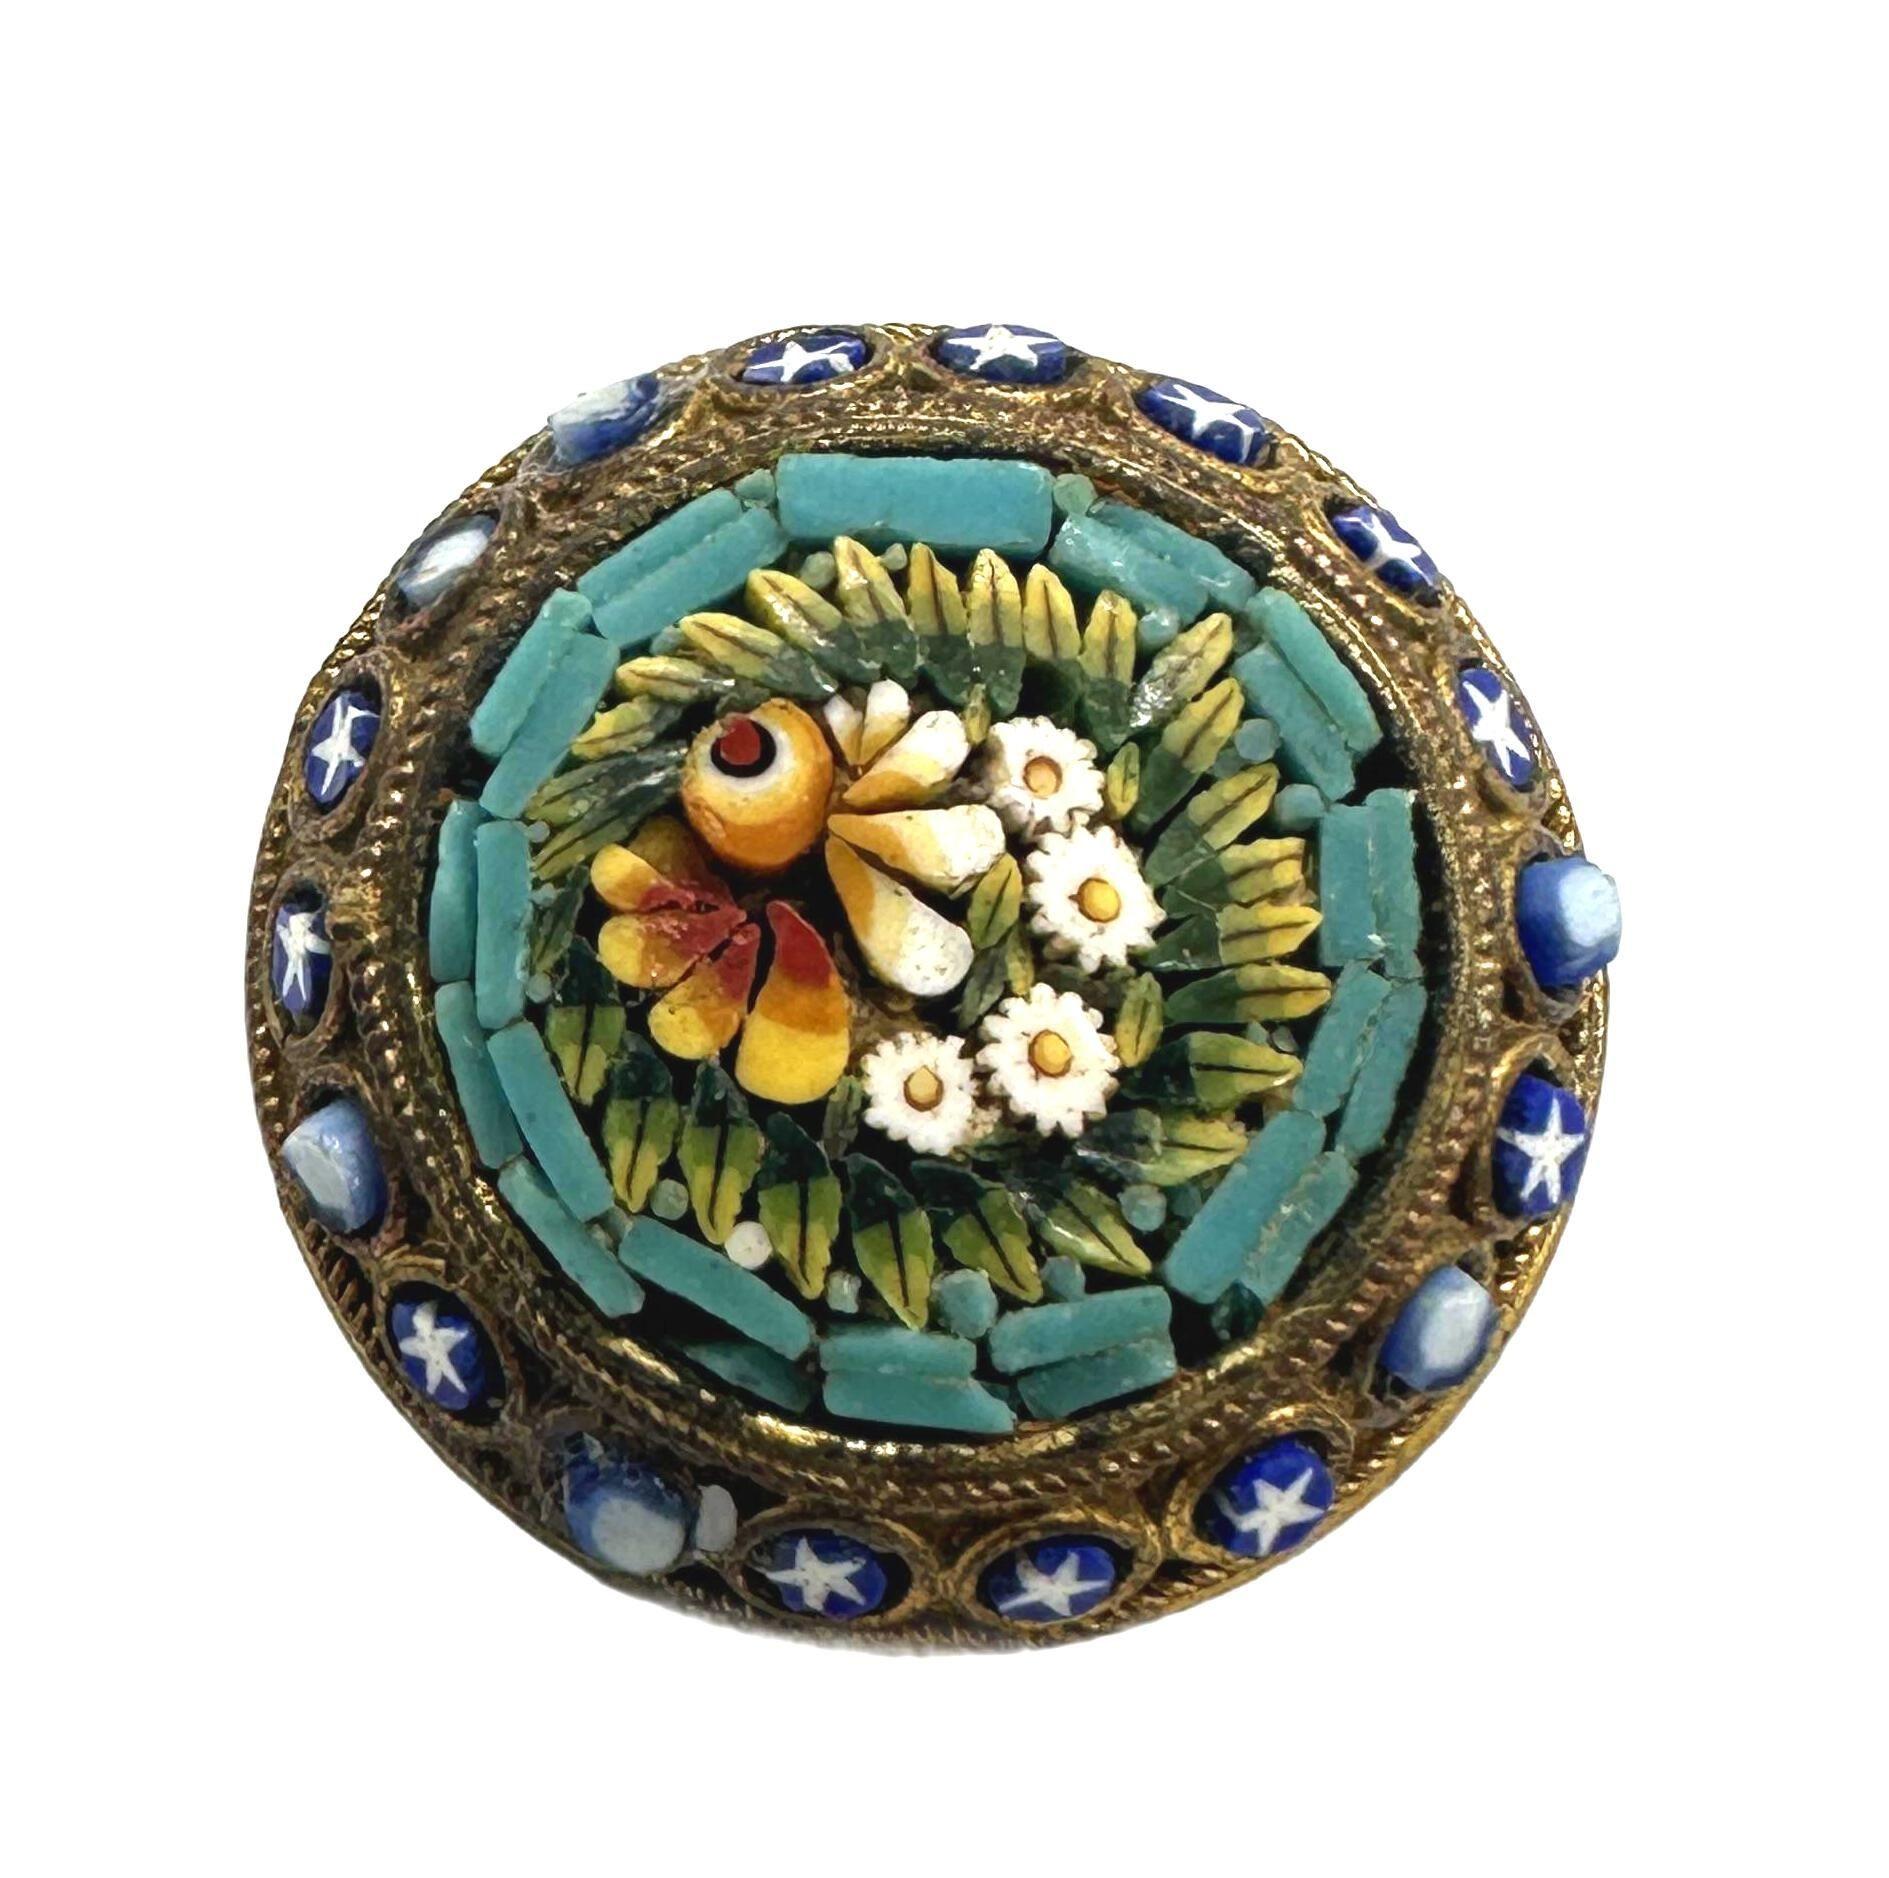 Lovely vintage Italian micro mosaic brooch featuring a floral motif, crafted with shell inlay and set in brass. Measuring 1 inch in diameter, it remains in excellent vintage condition with all shells intact. It is stamped 